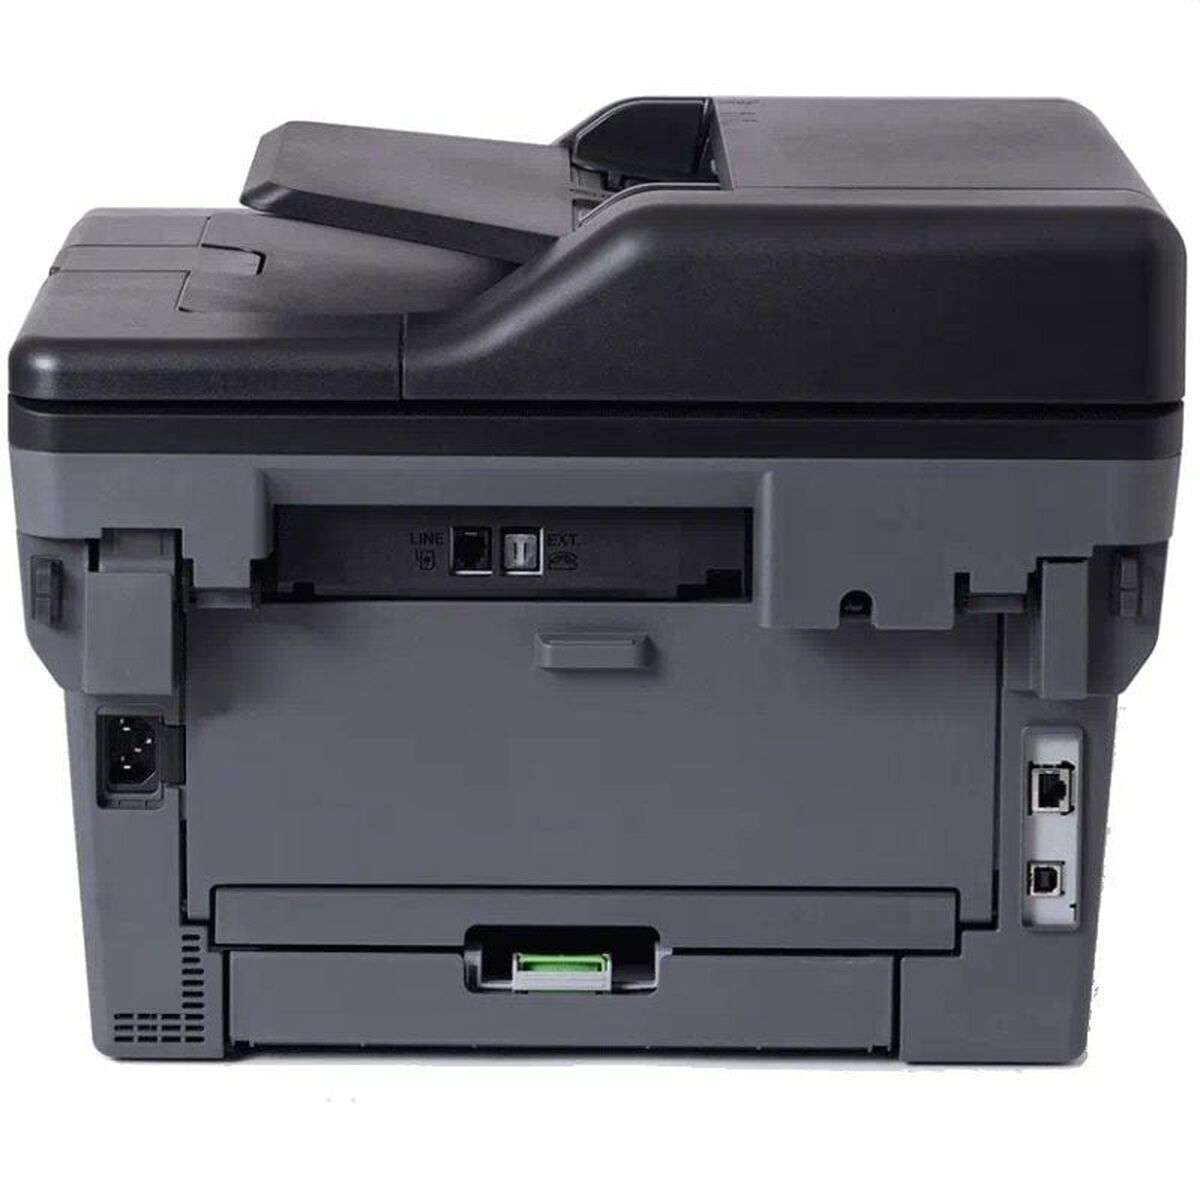 Laser Printer Brother MFC-L2827DWXL, Brother, Computing, Printers and accessories, laser-printer-brother-mfc-l2827dwxl, Brand_Brother, category-reference-2609, category-reference-2642, category-reference-2645, category-reference-t-19685, category-reference-t-19911, category-reference-t-21378, category-reference-t-25692, computers / peripherals, Condition_NEW, office, Price_300 - 400, Teleworking, RiotNook